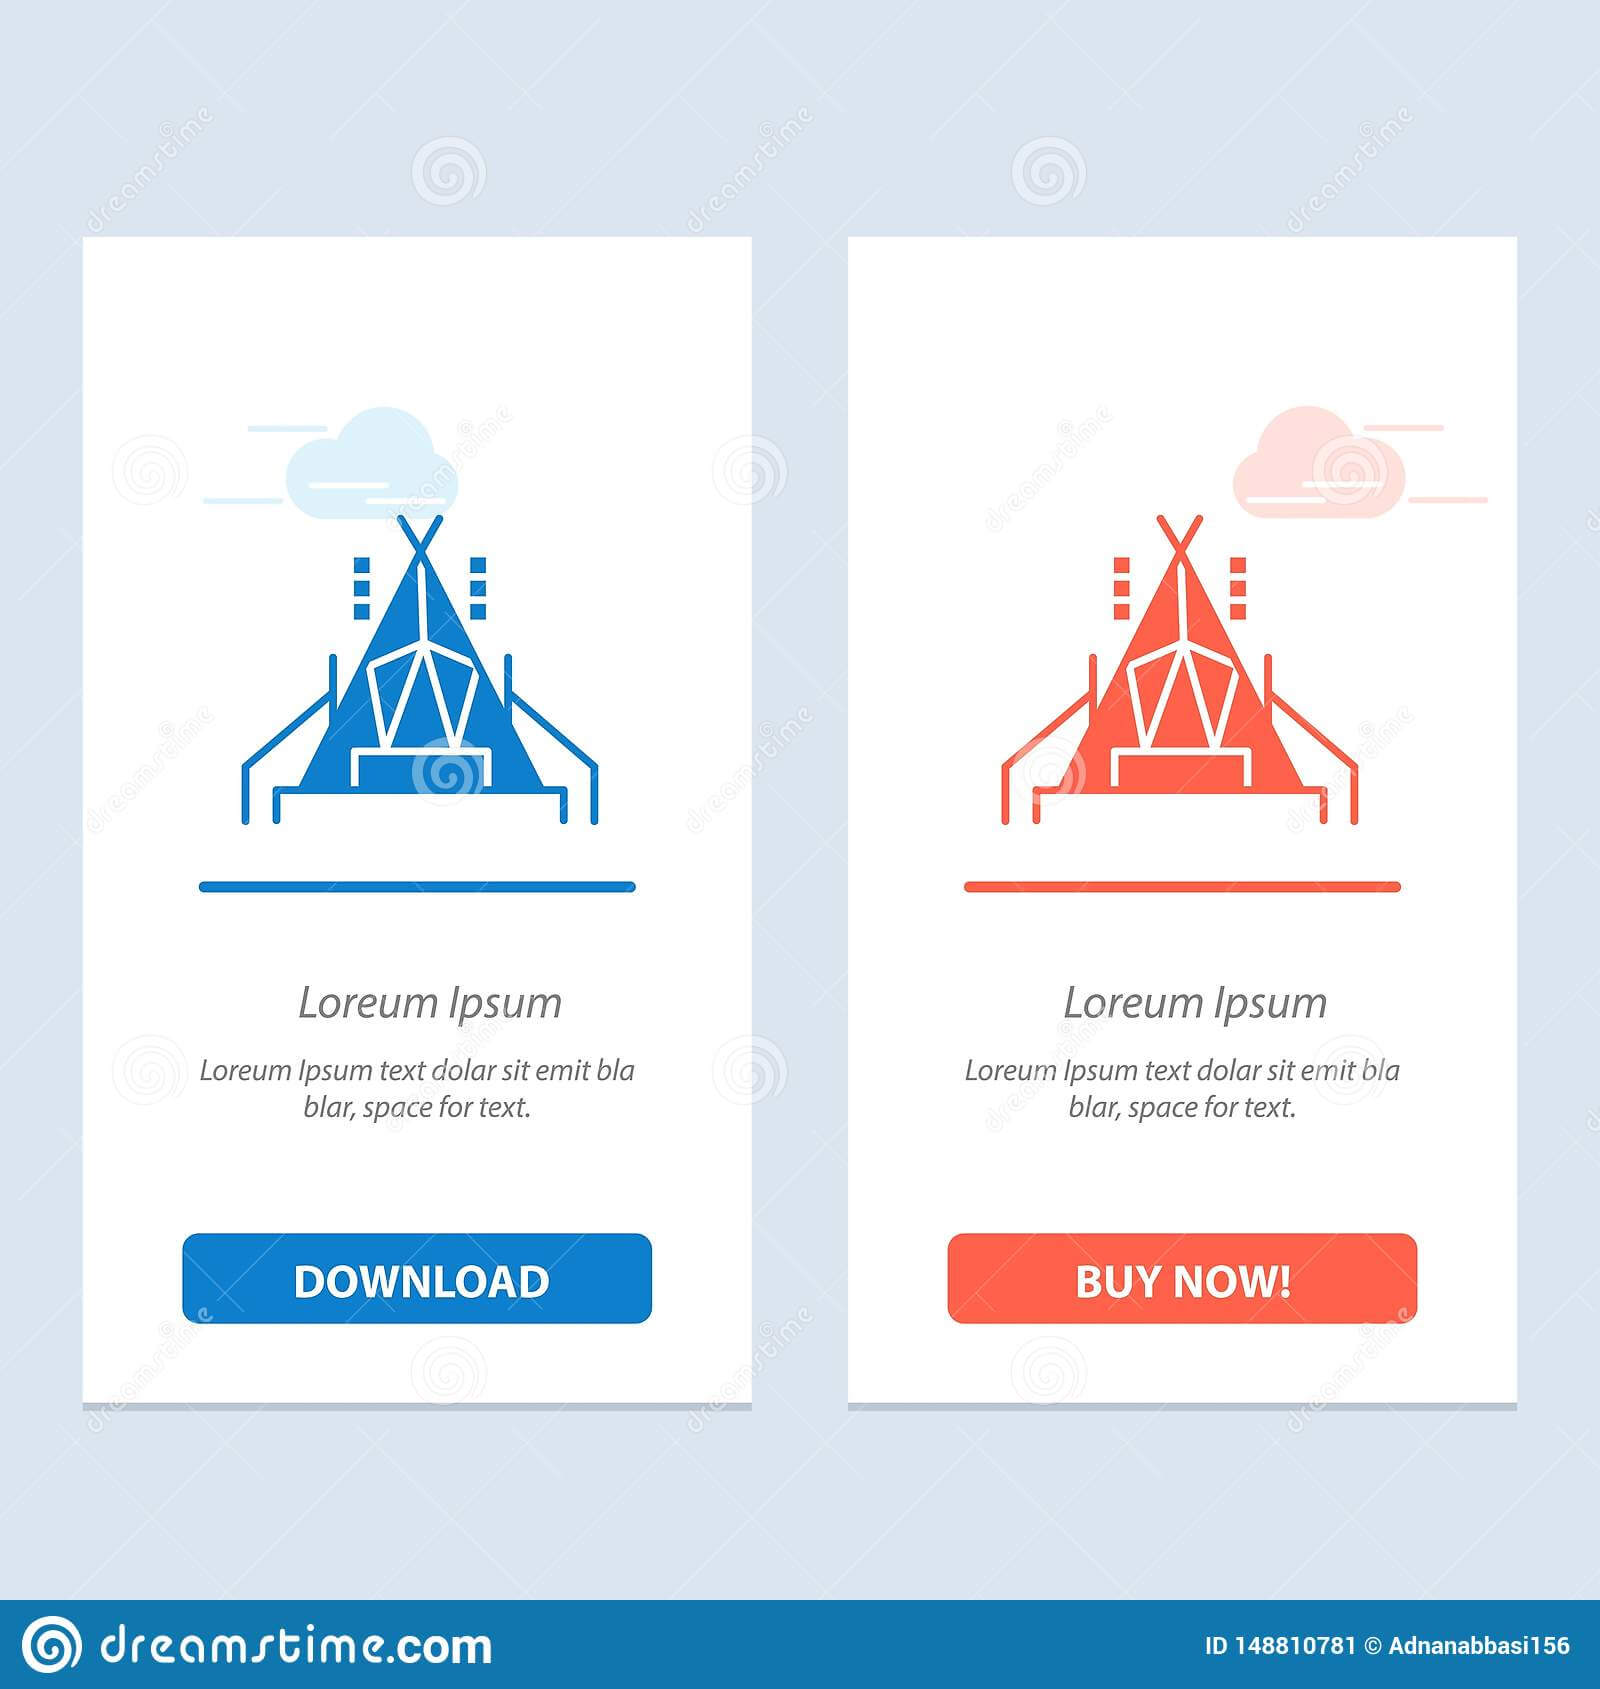 Camp, Tent, Camping Blue And Red Download And Buy Now Web In Free Tent Card Template Downloads